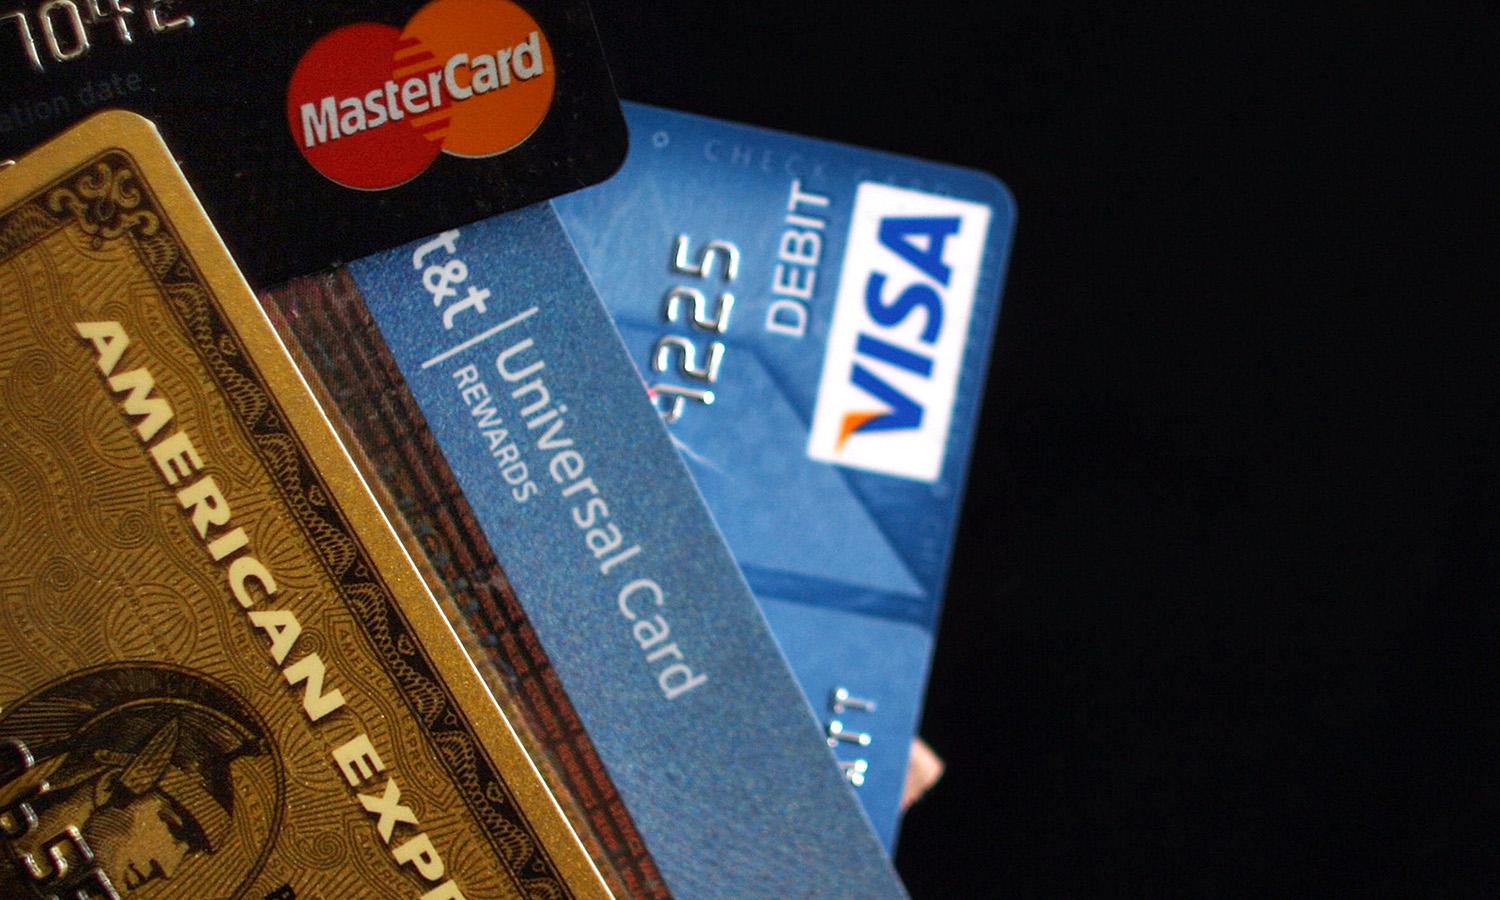 Major U.S. credit cards are seen on May 20, 2009, in New York City. (Spencer Platt/Getty Images)